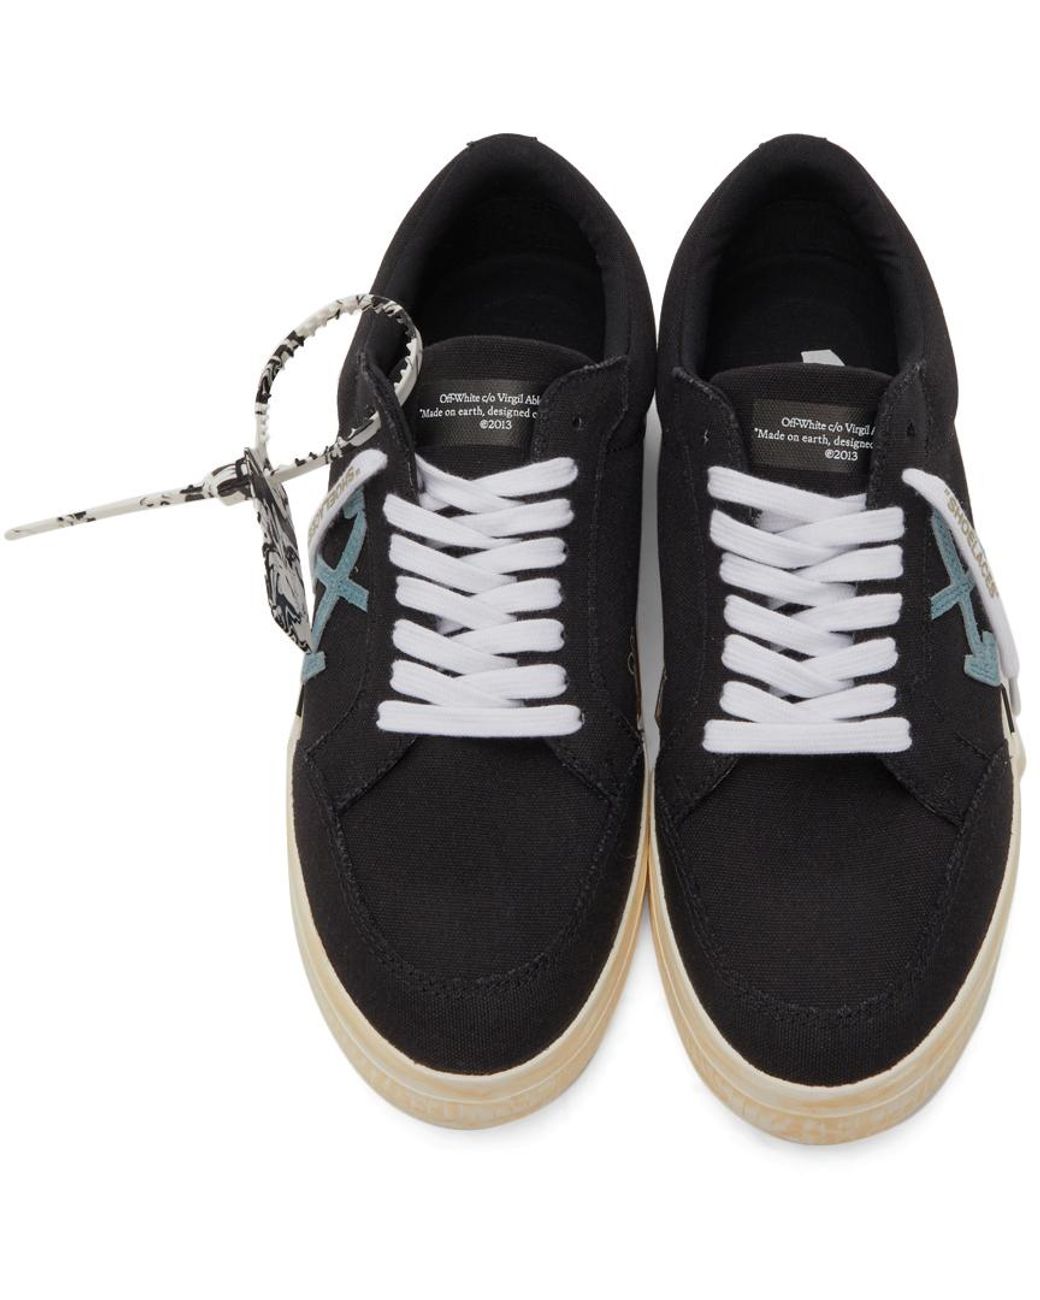 - Save 61% Womens Trainers Off-White c/o Virgil Abloh Trainers Off-White c/o Virgil Abloh Denim Low Vulcanized Eco Canvas Sneaker in White Black White 